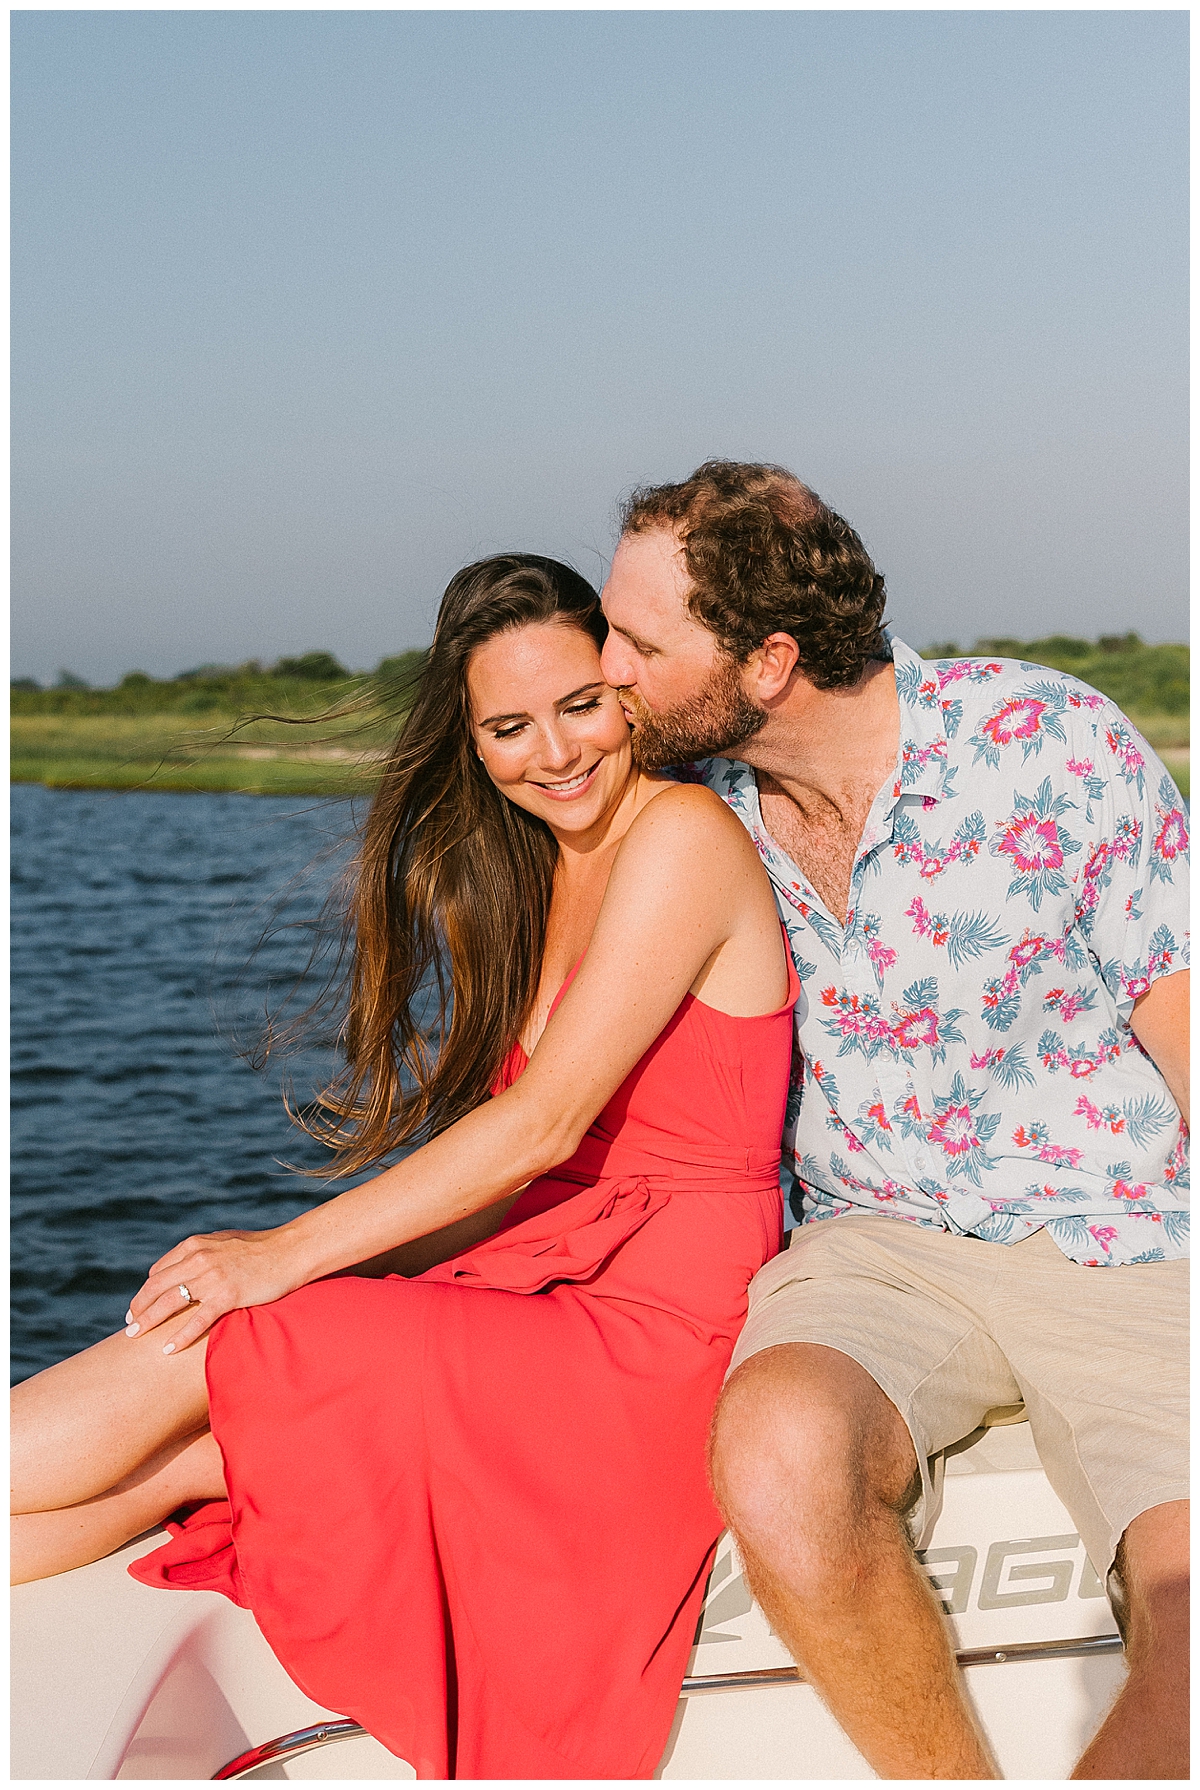 Sam and Randi on the boat during their Nantucket engagement session